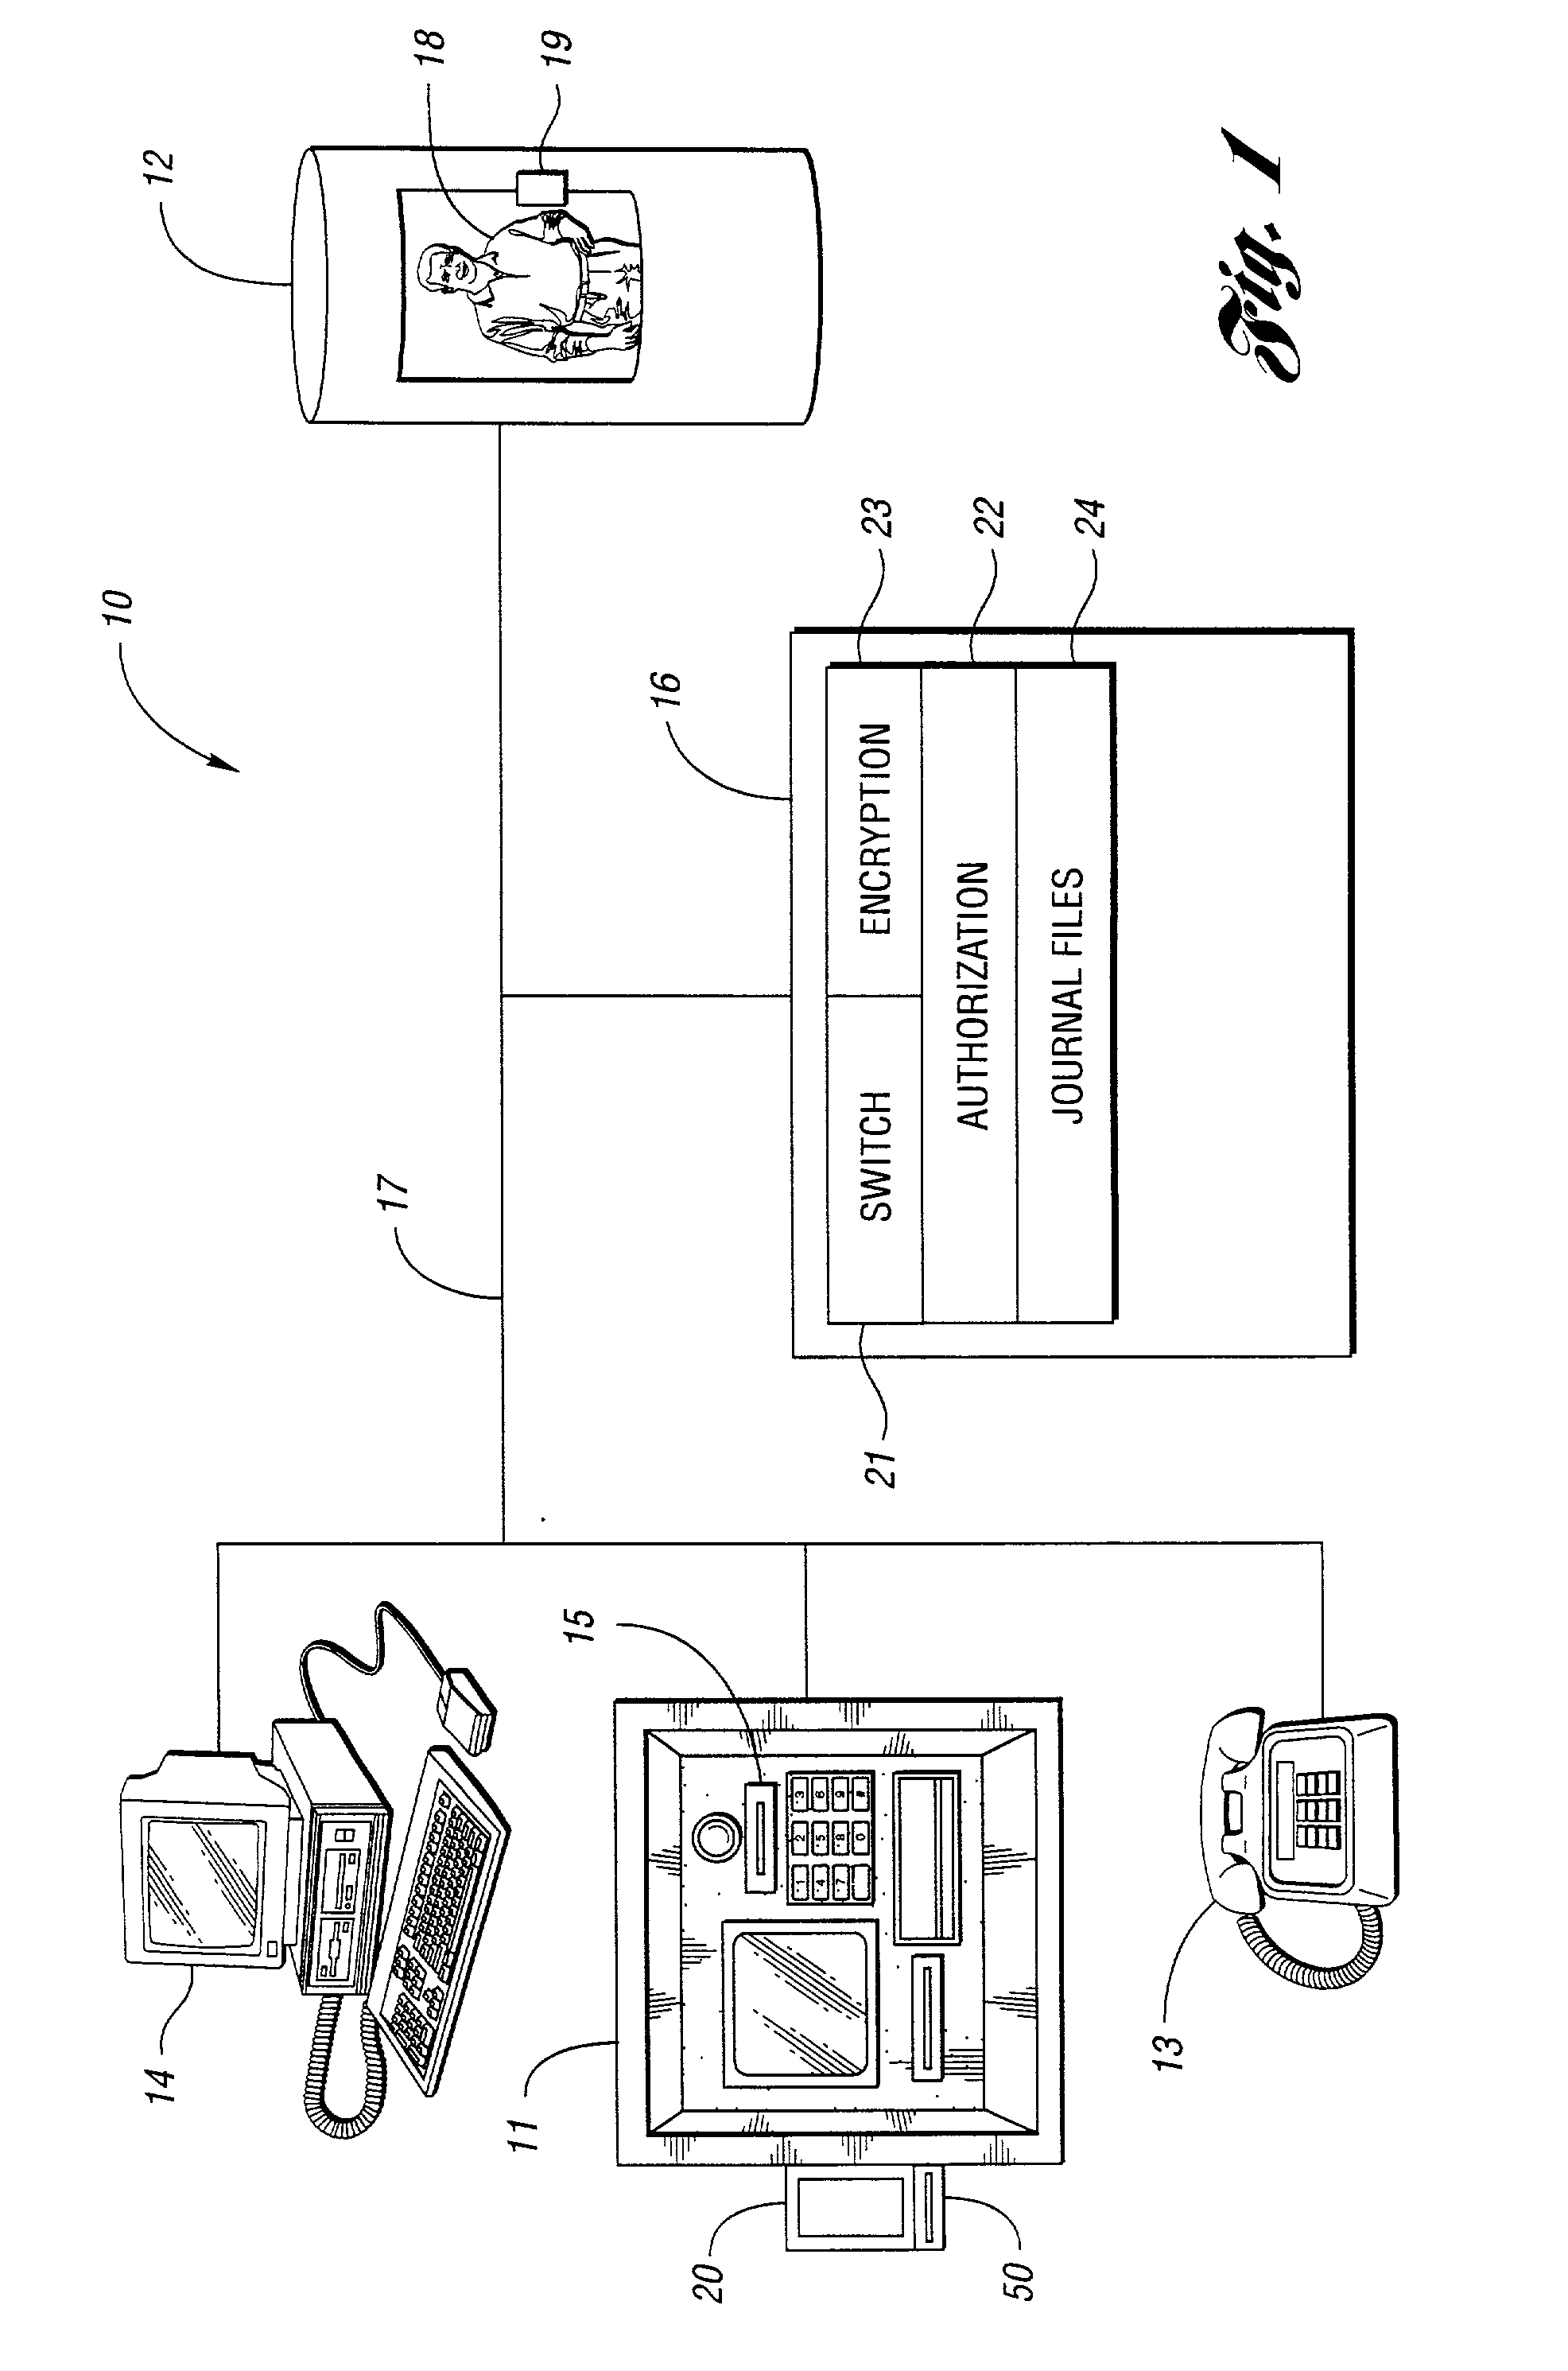 Method and system for electronic transfer of funds implementing an automated teller machine in conjunction with a manned kiosk